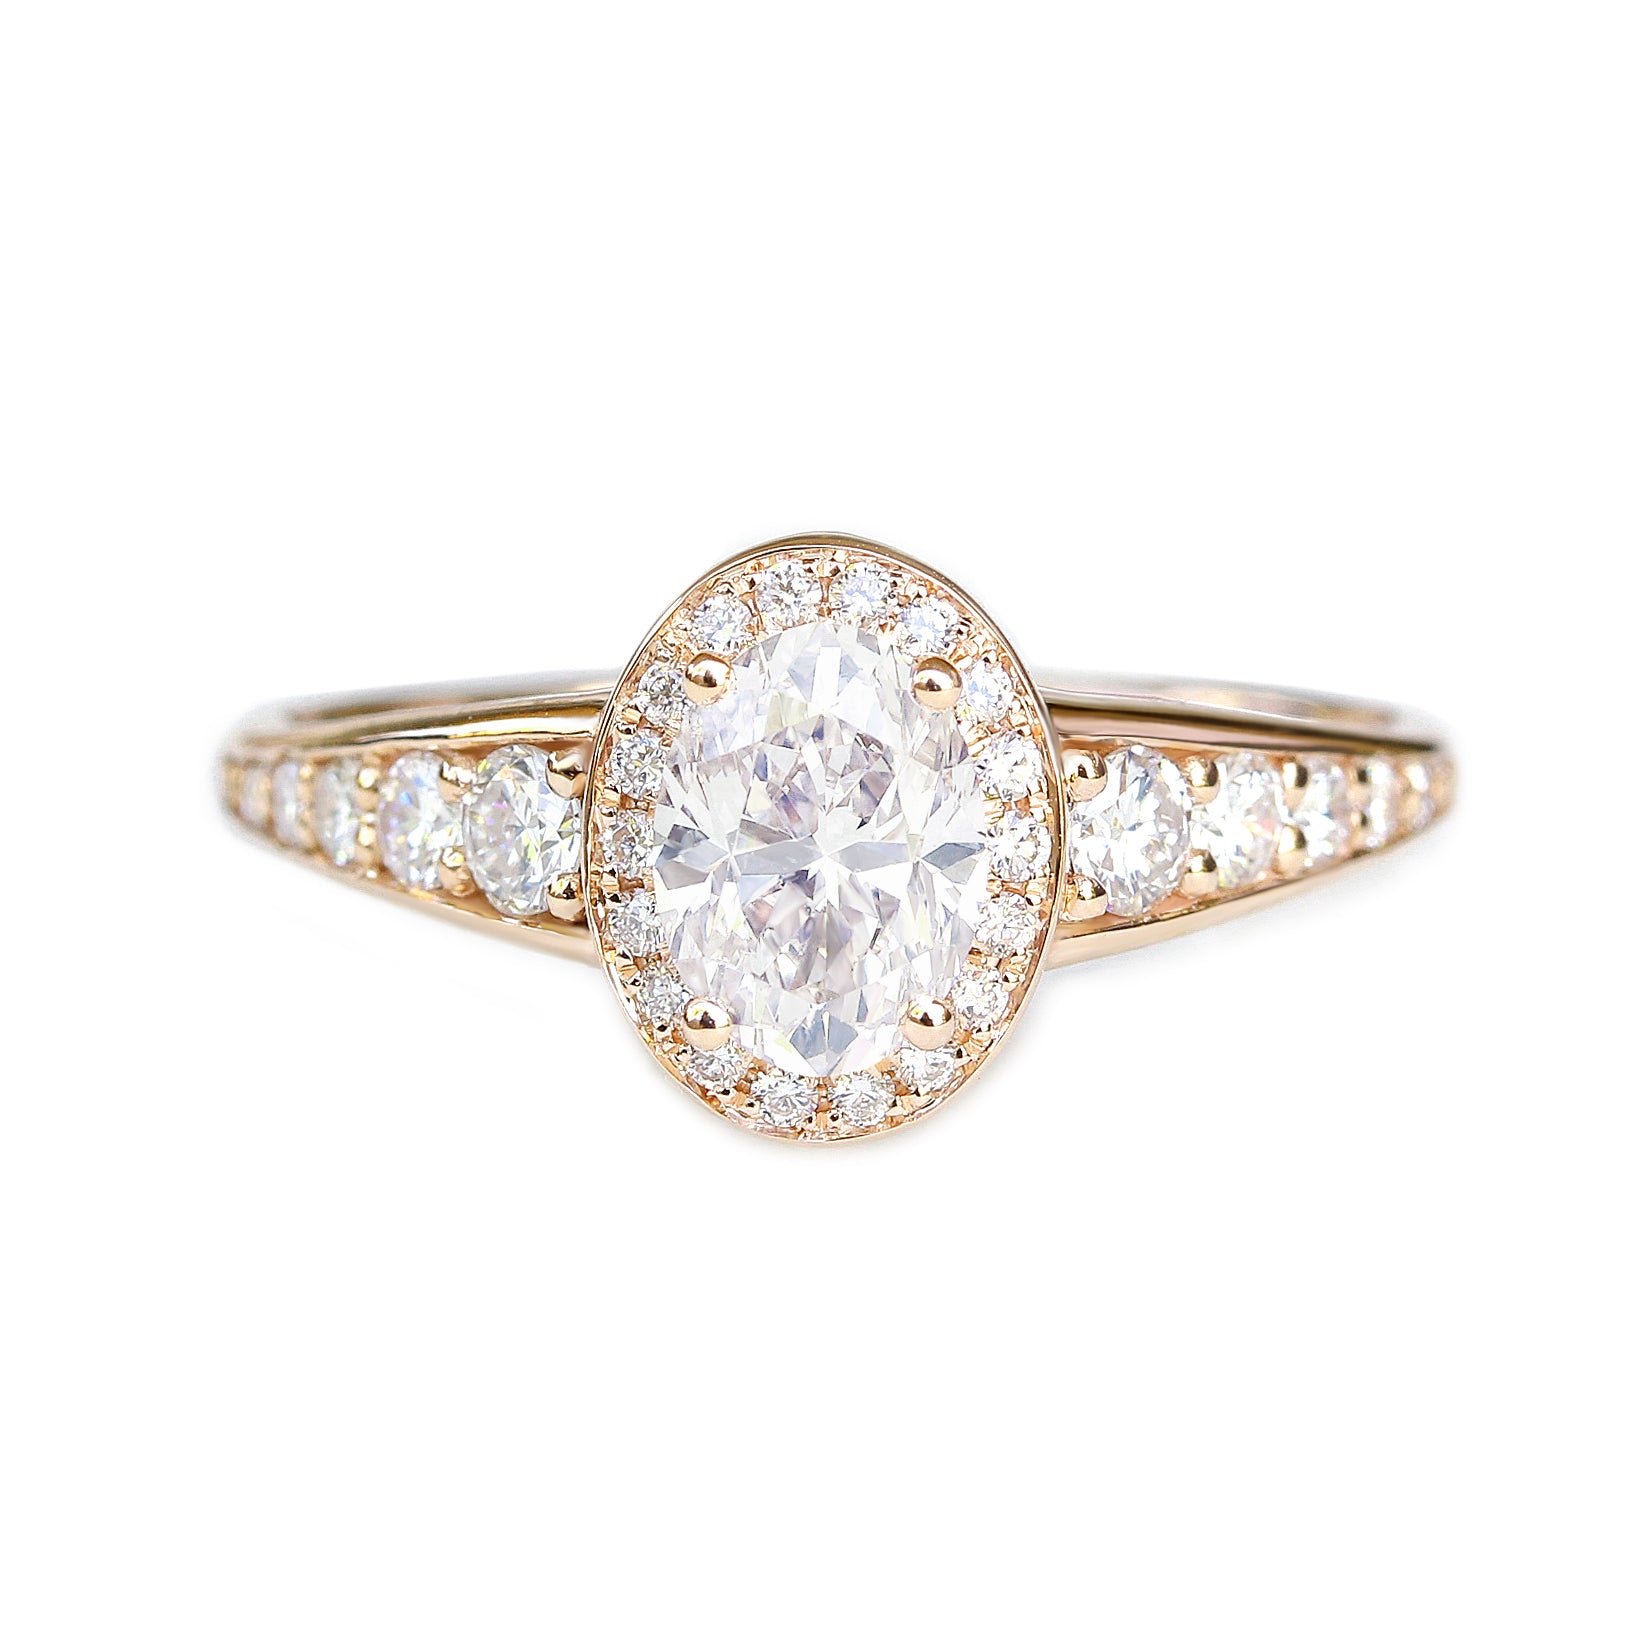 Oval Diamond 0.98ct Vintage Engagement Ring, "Donna" ♥